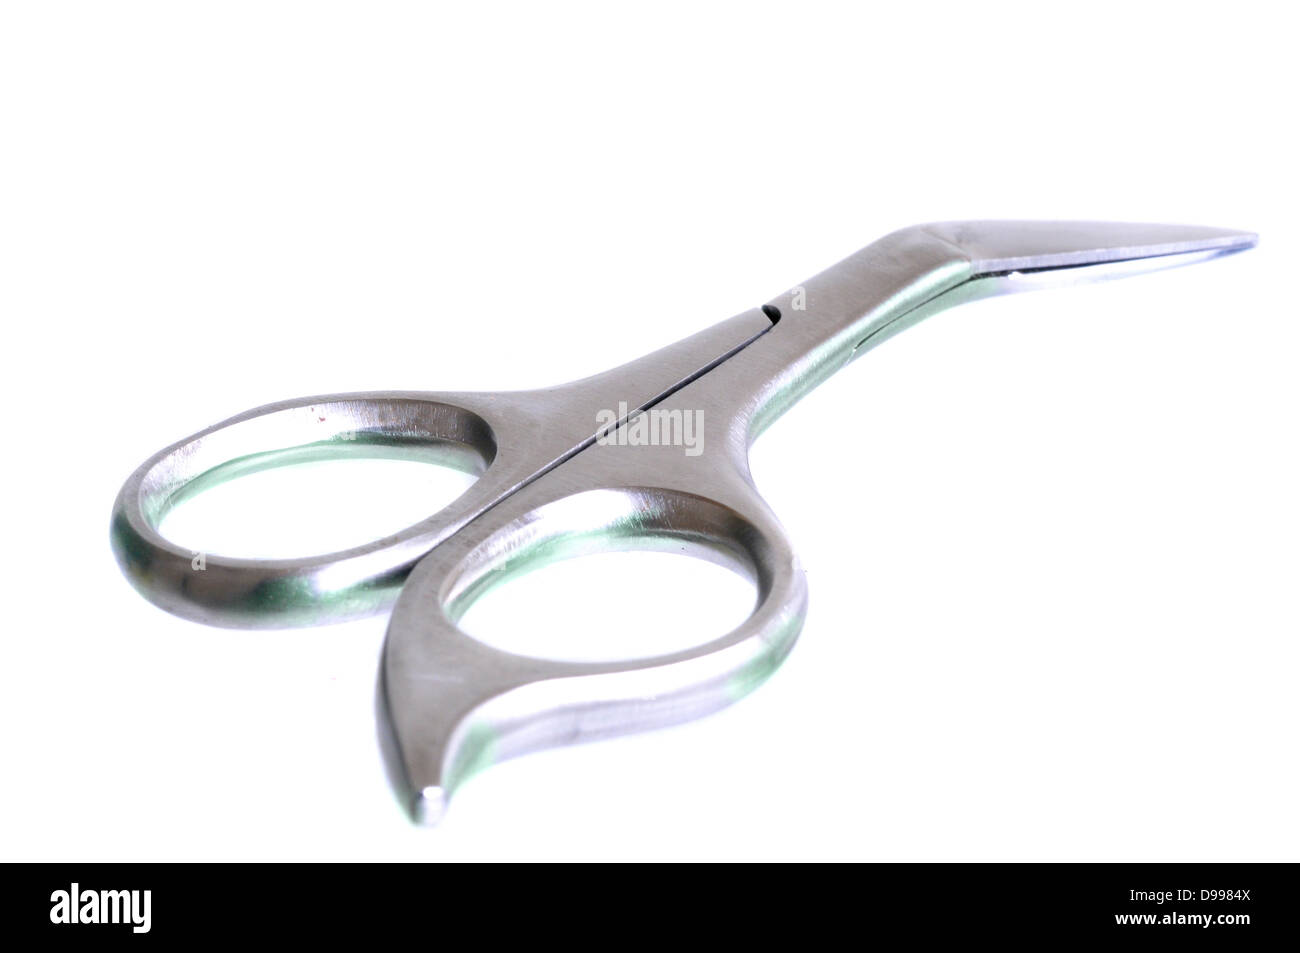 Small scissors isolated on white Stock Photo